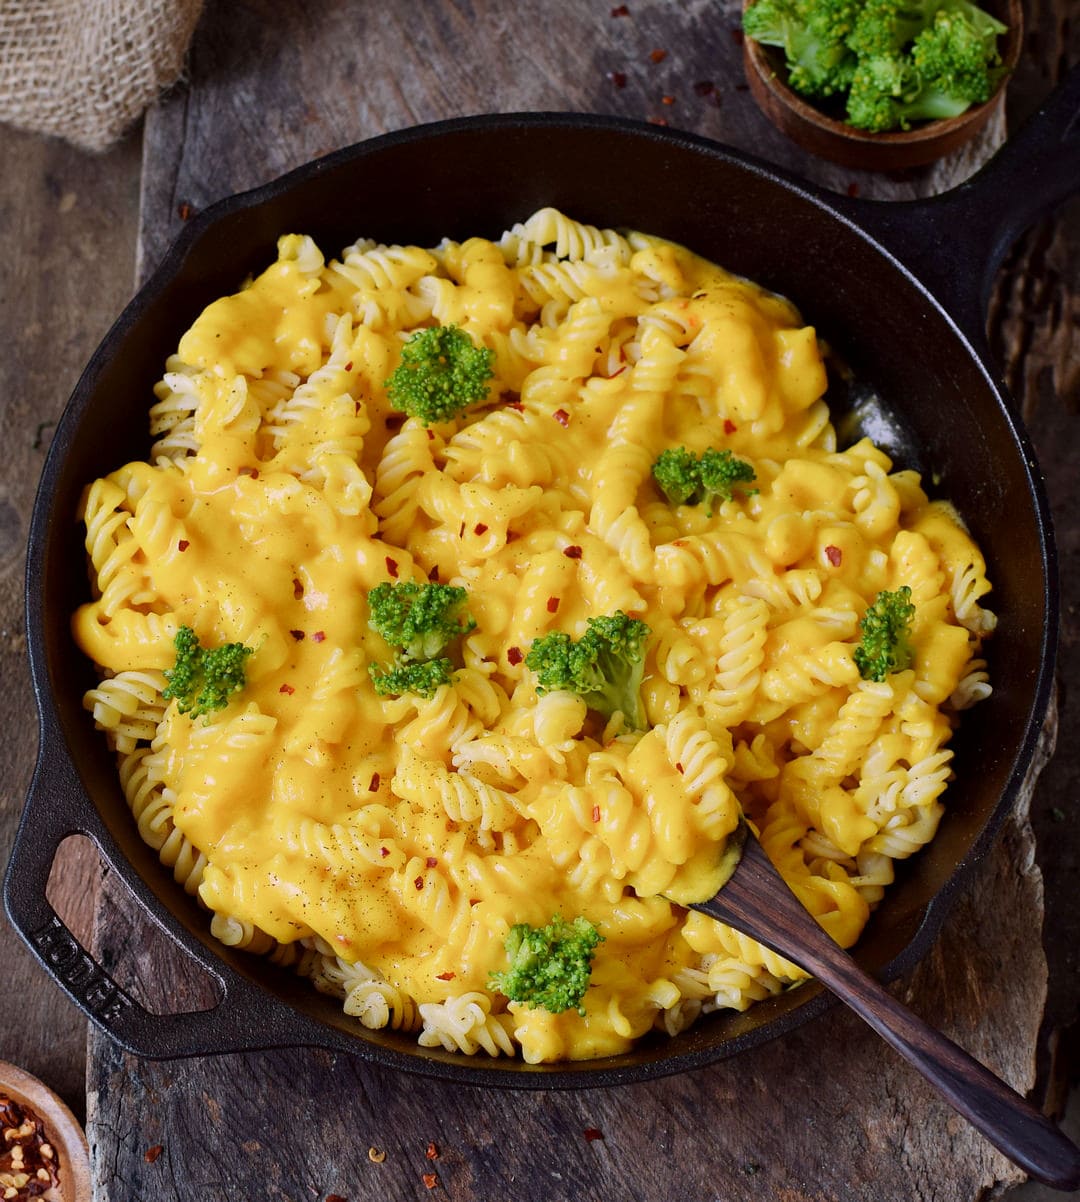 Plant-based cheese sauce with pasta and broccoli in a black skillet